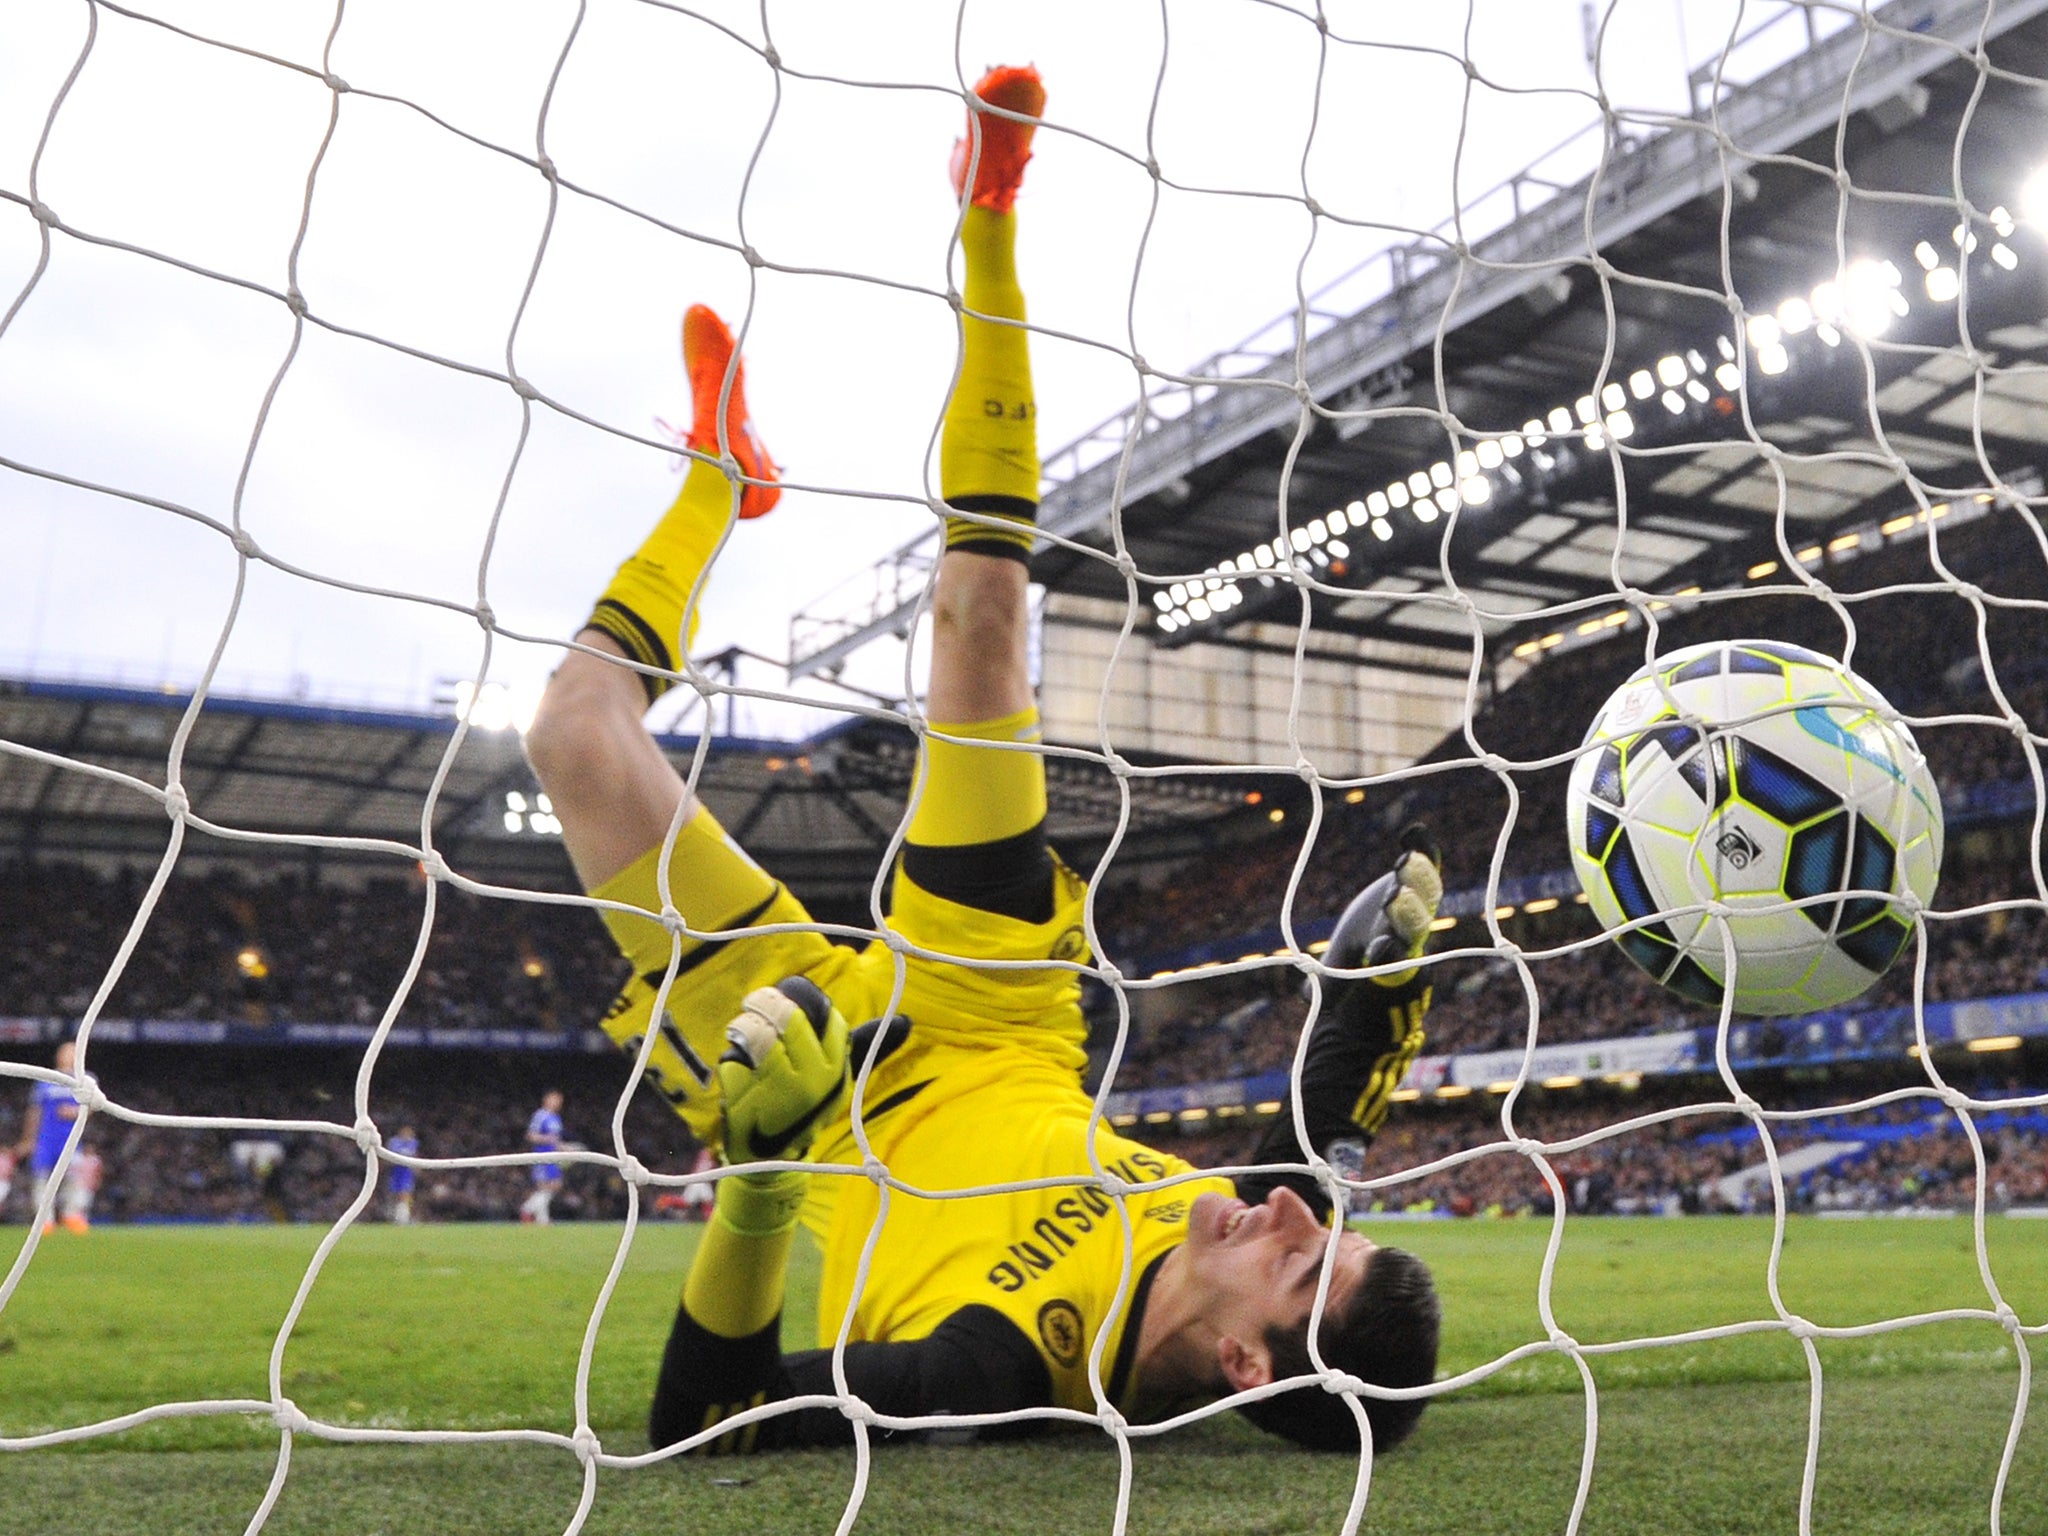 Charlie Adam's goal wasn't enough to stop his side losing 2-1 at Stamford Bridge